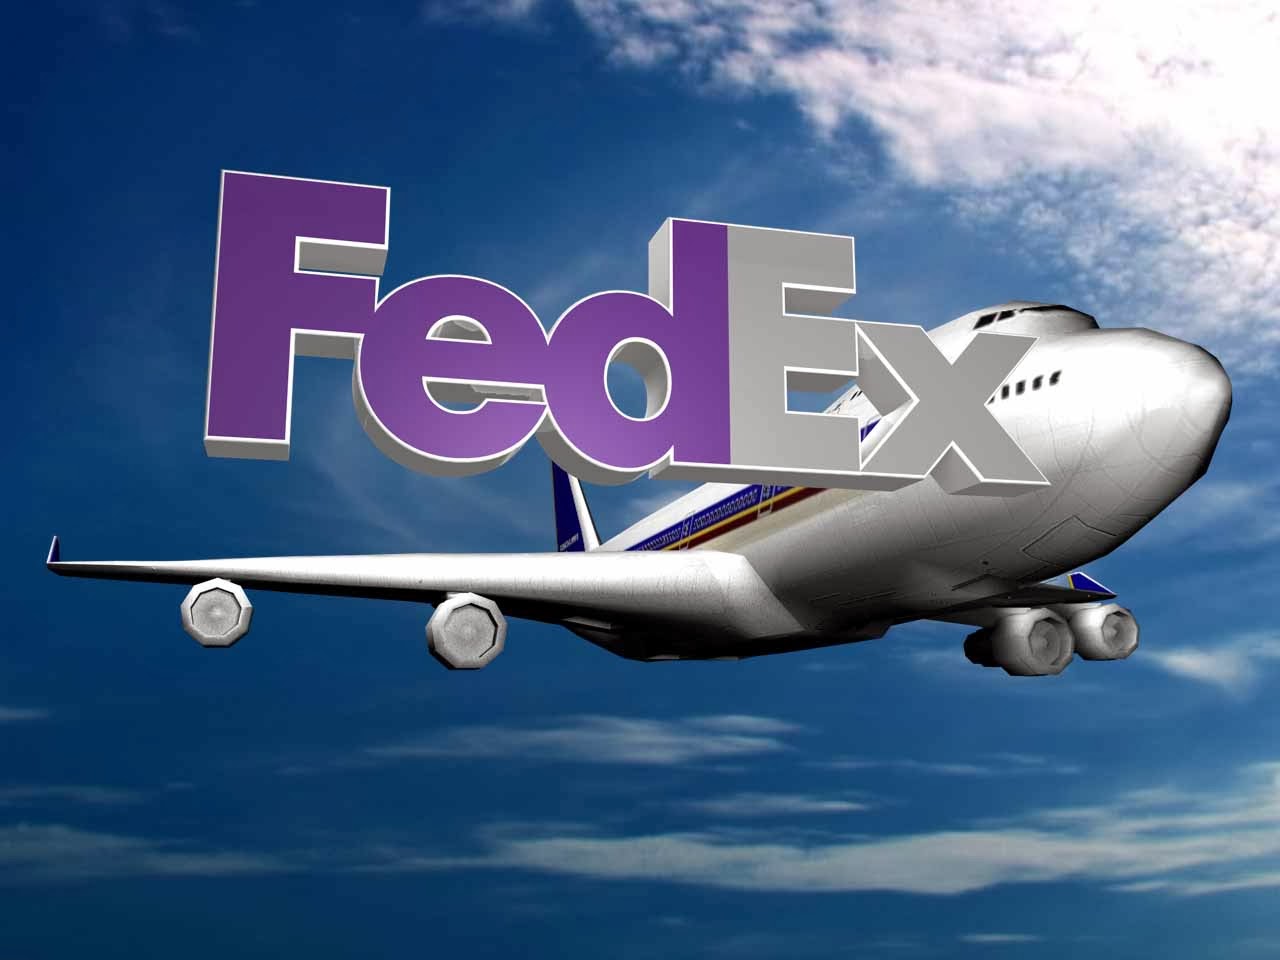 fedex wallpaper,air travel,airplane,airline,airliner,aircraft